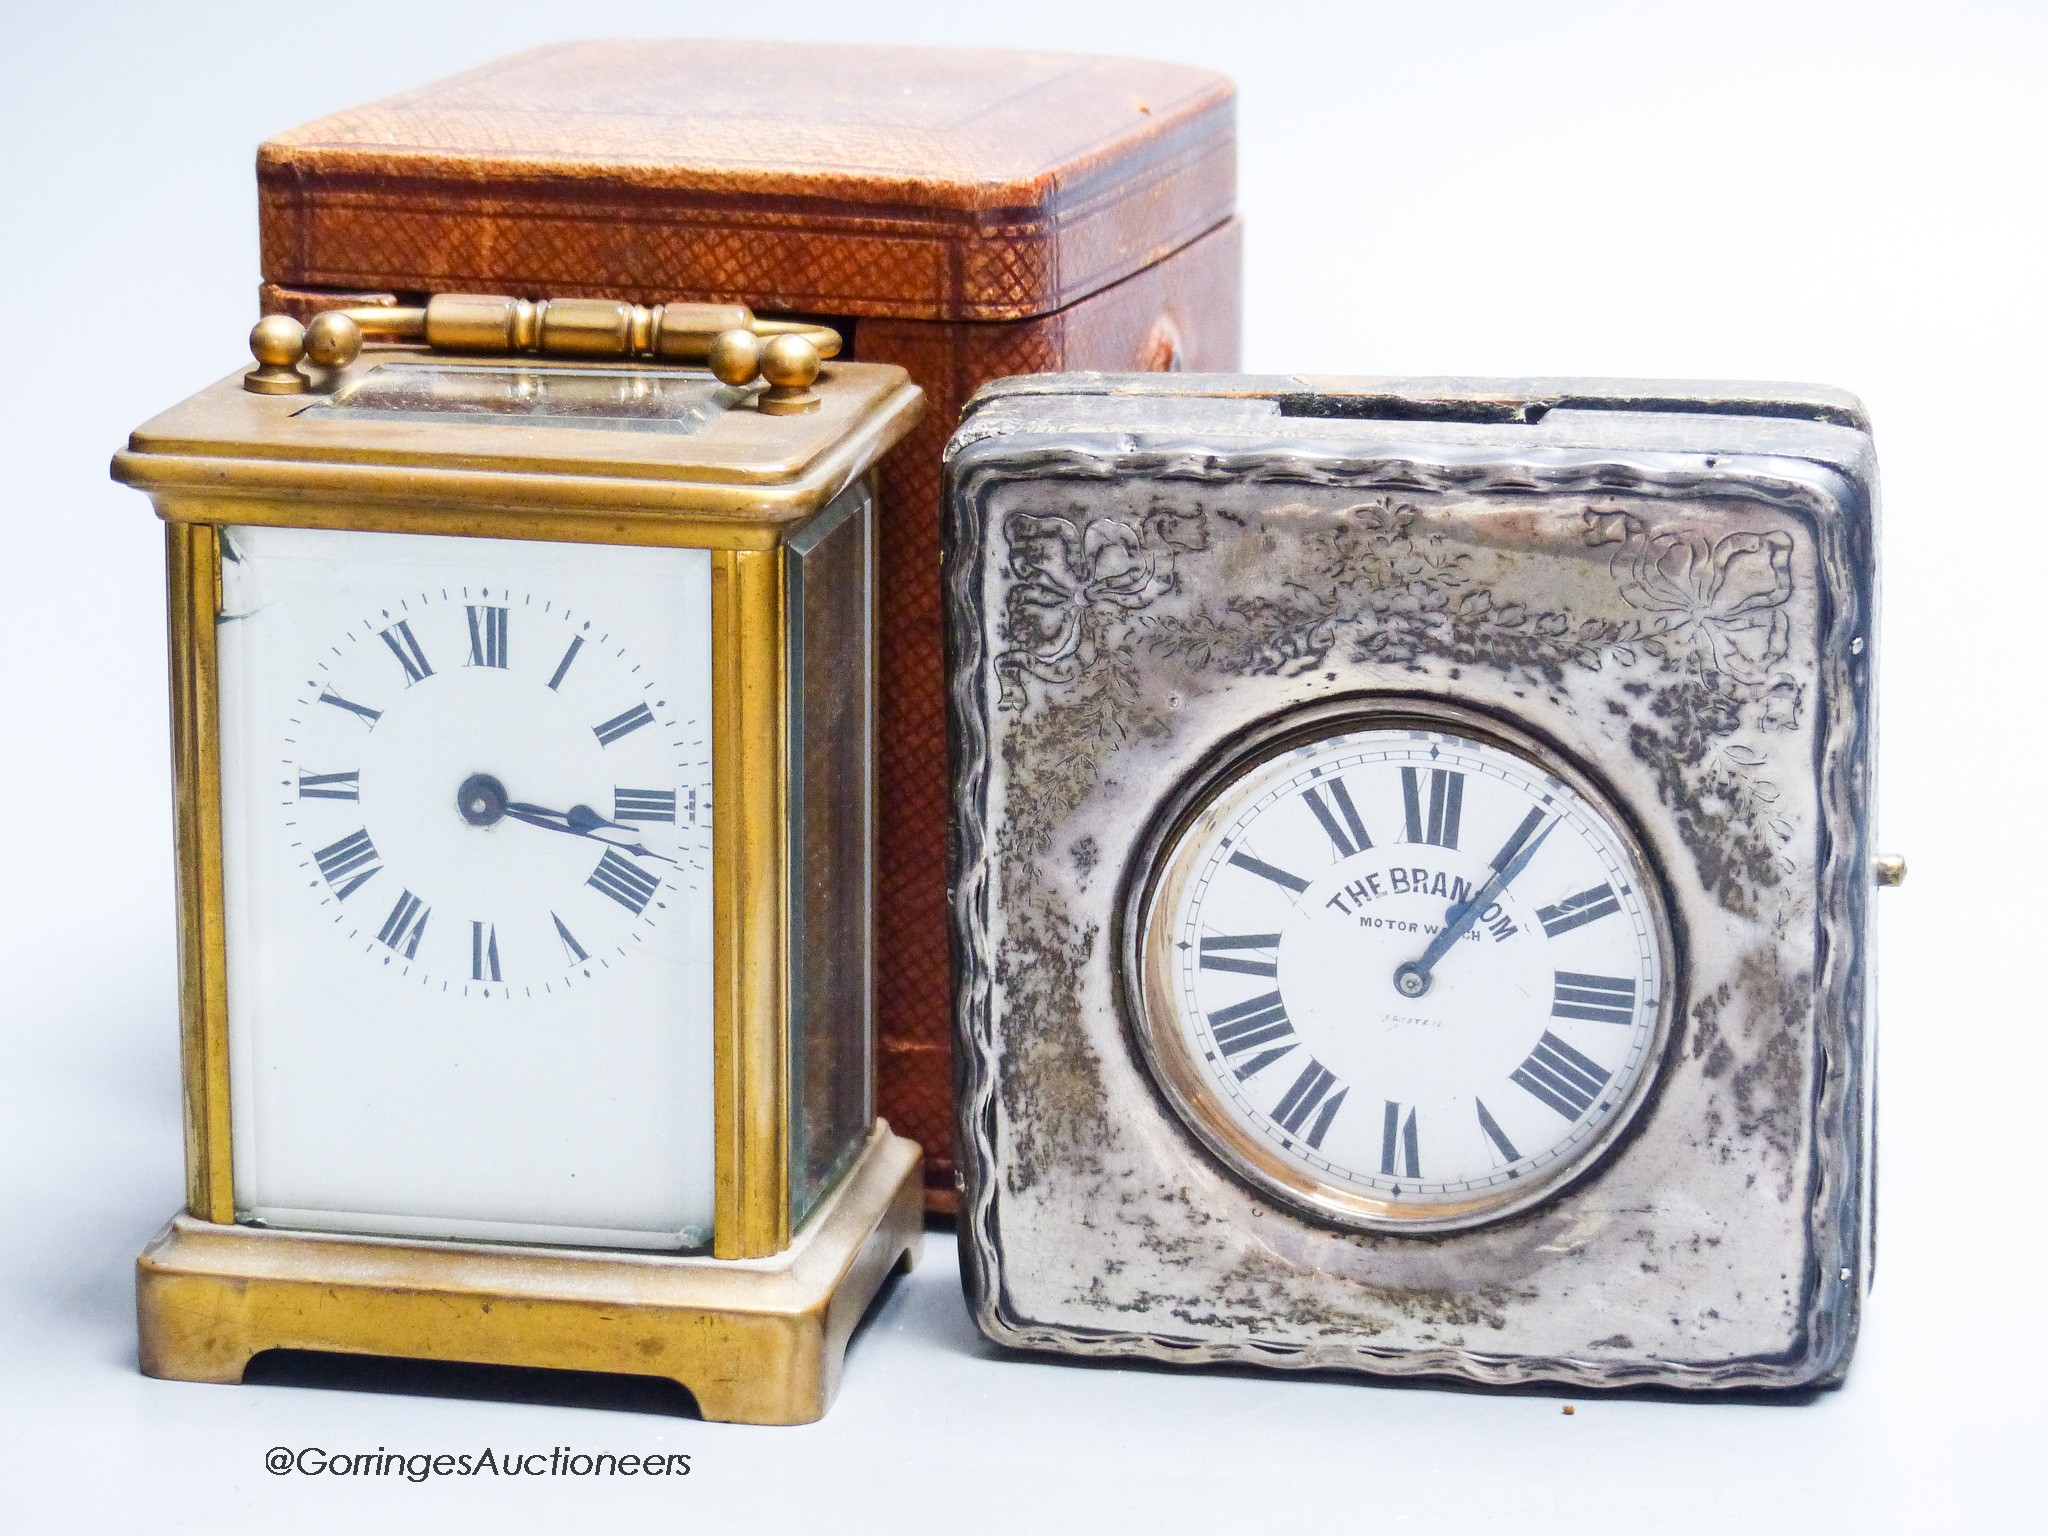 A cased carriage clock and a silver mounted motorwatch